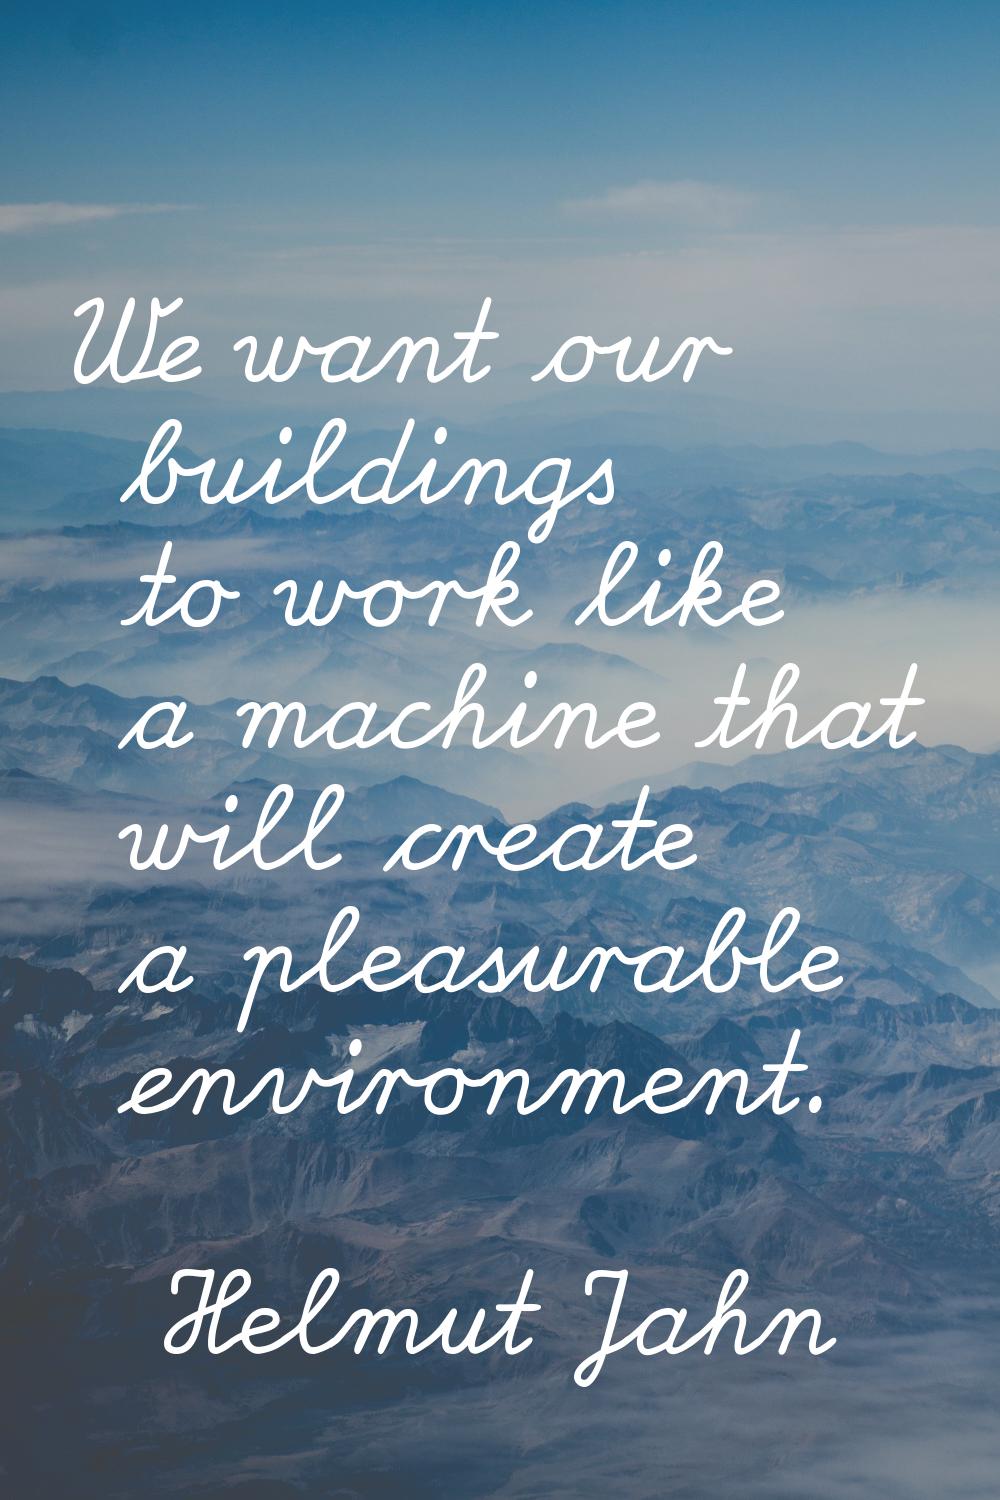 We want our buildings to work like a machine that will create a pleasurable environment.